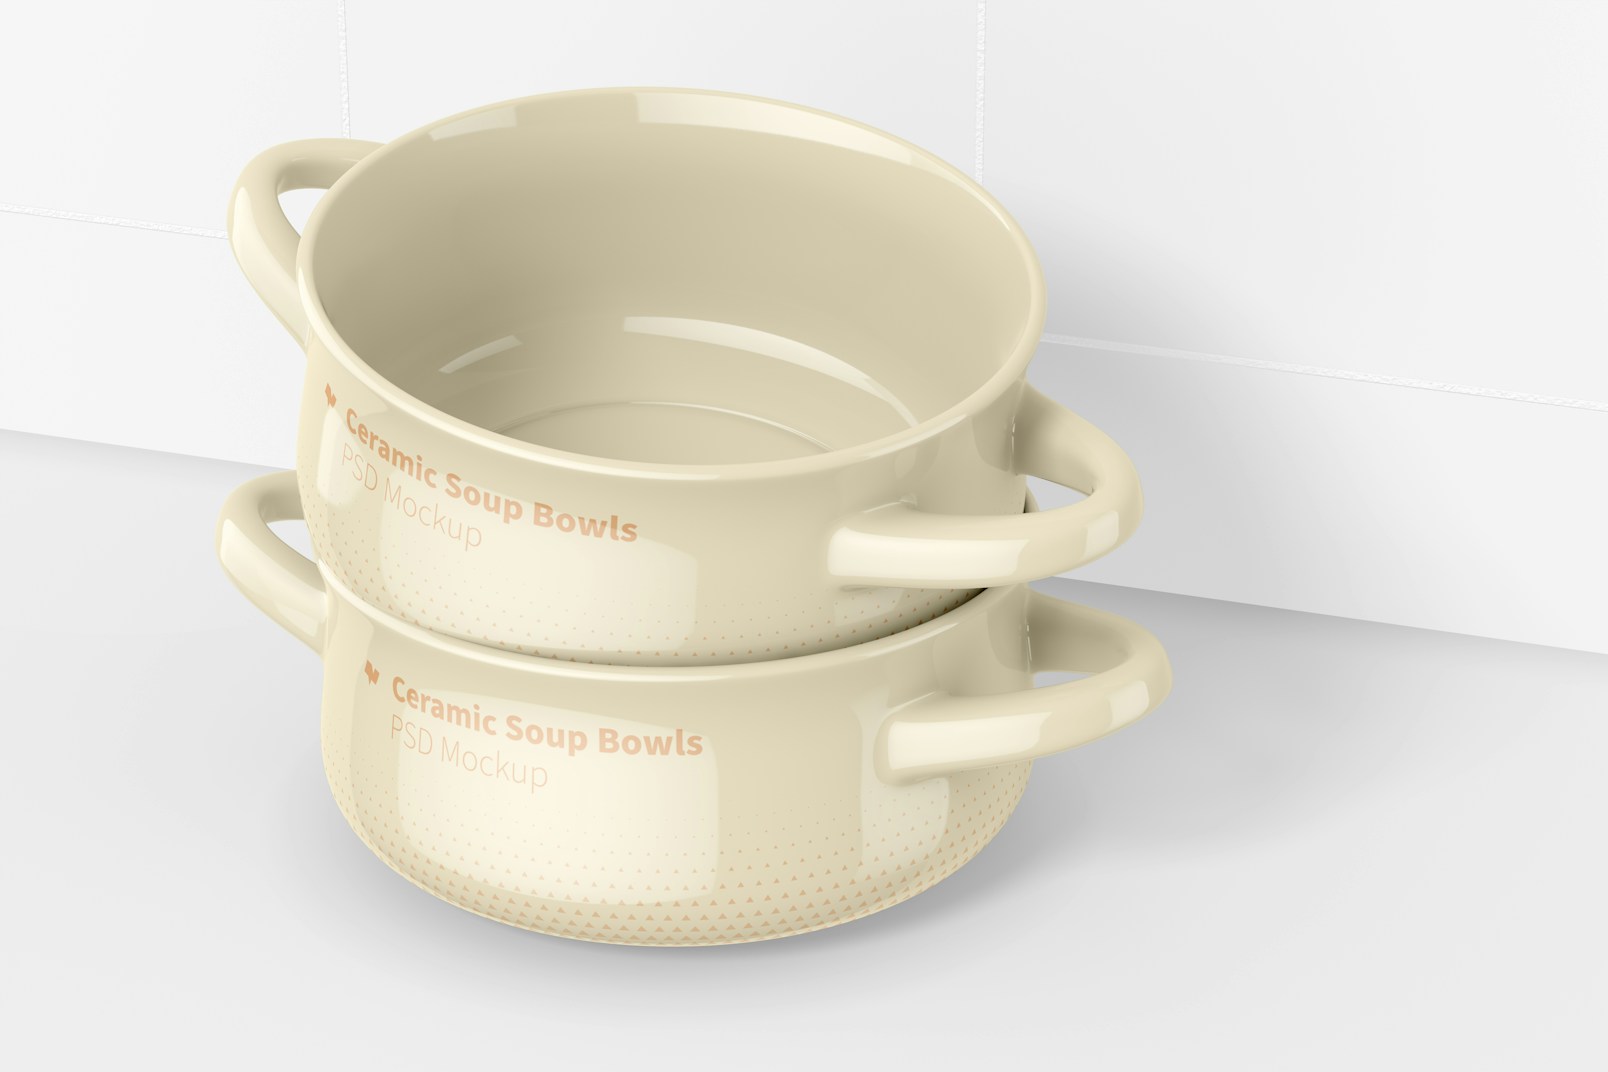 Ceramic Soup Bowls with Handles Mockup, Stacked